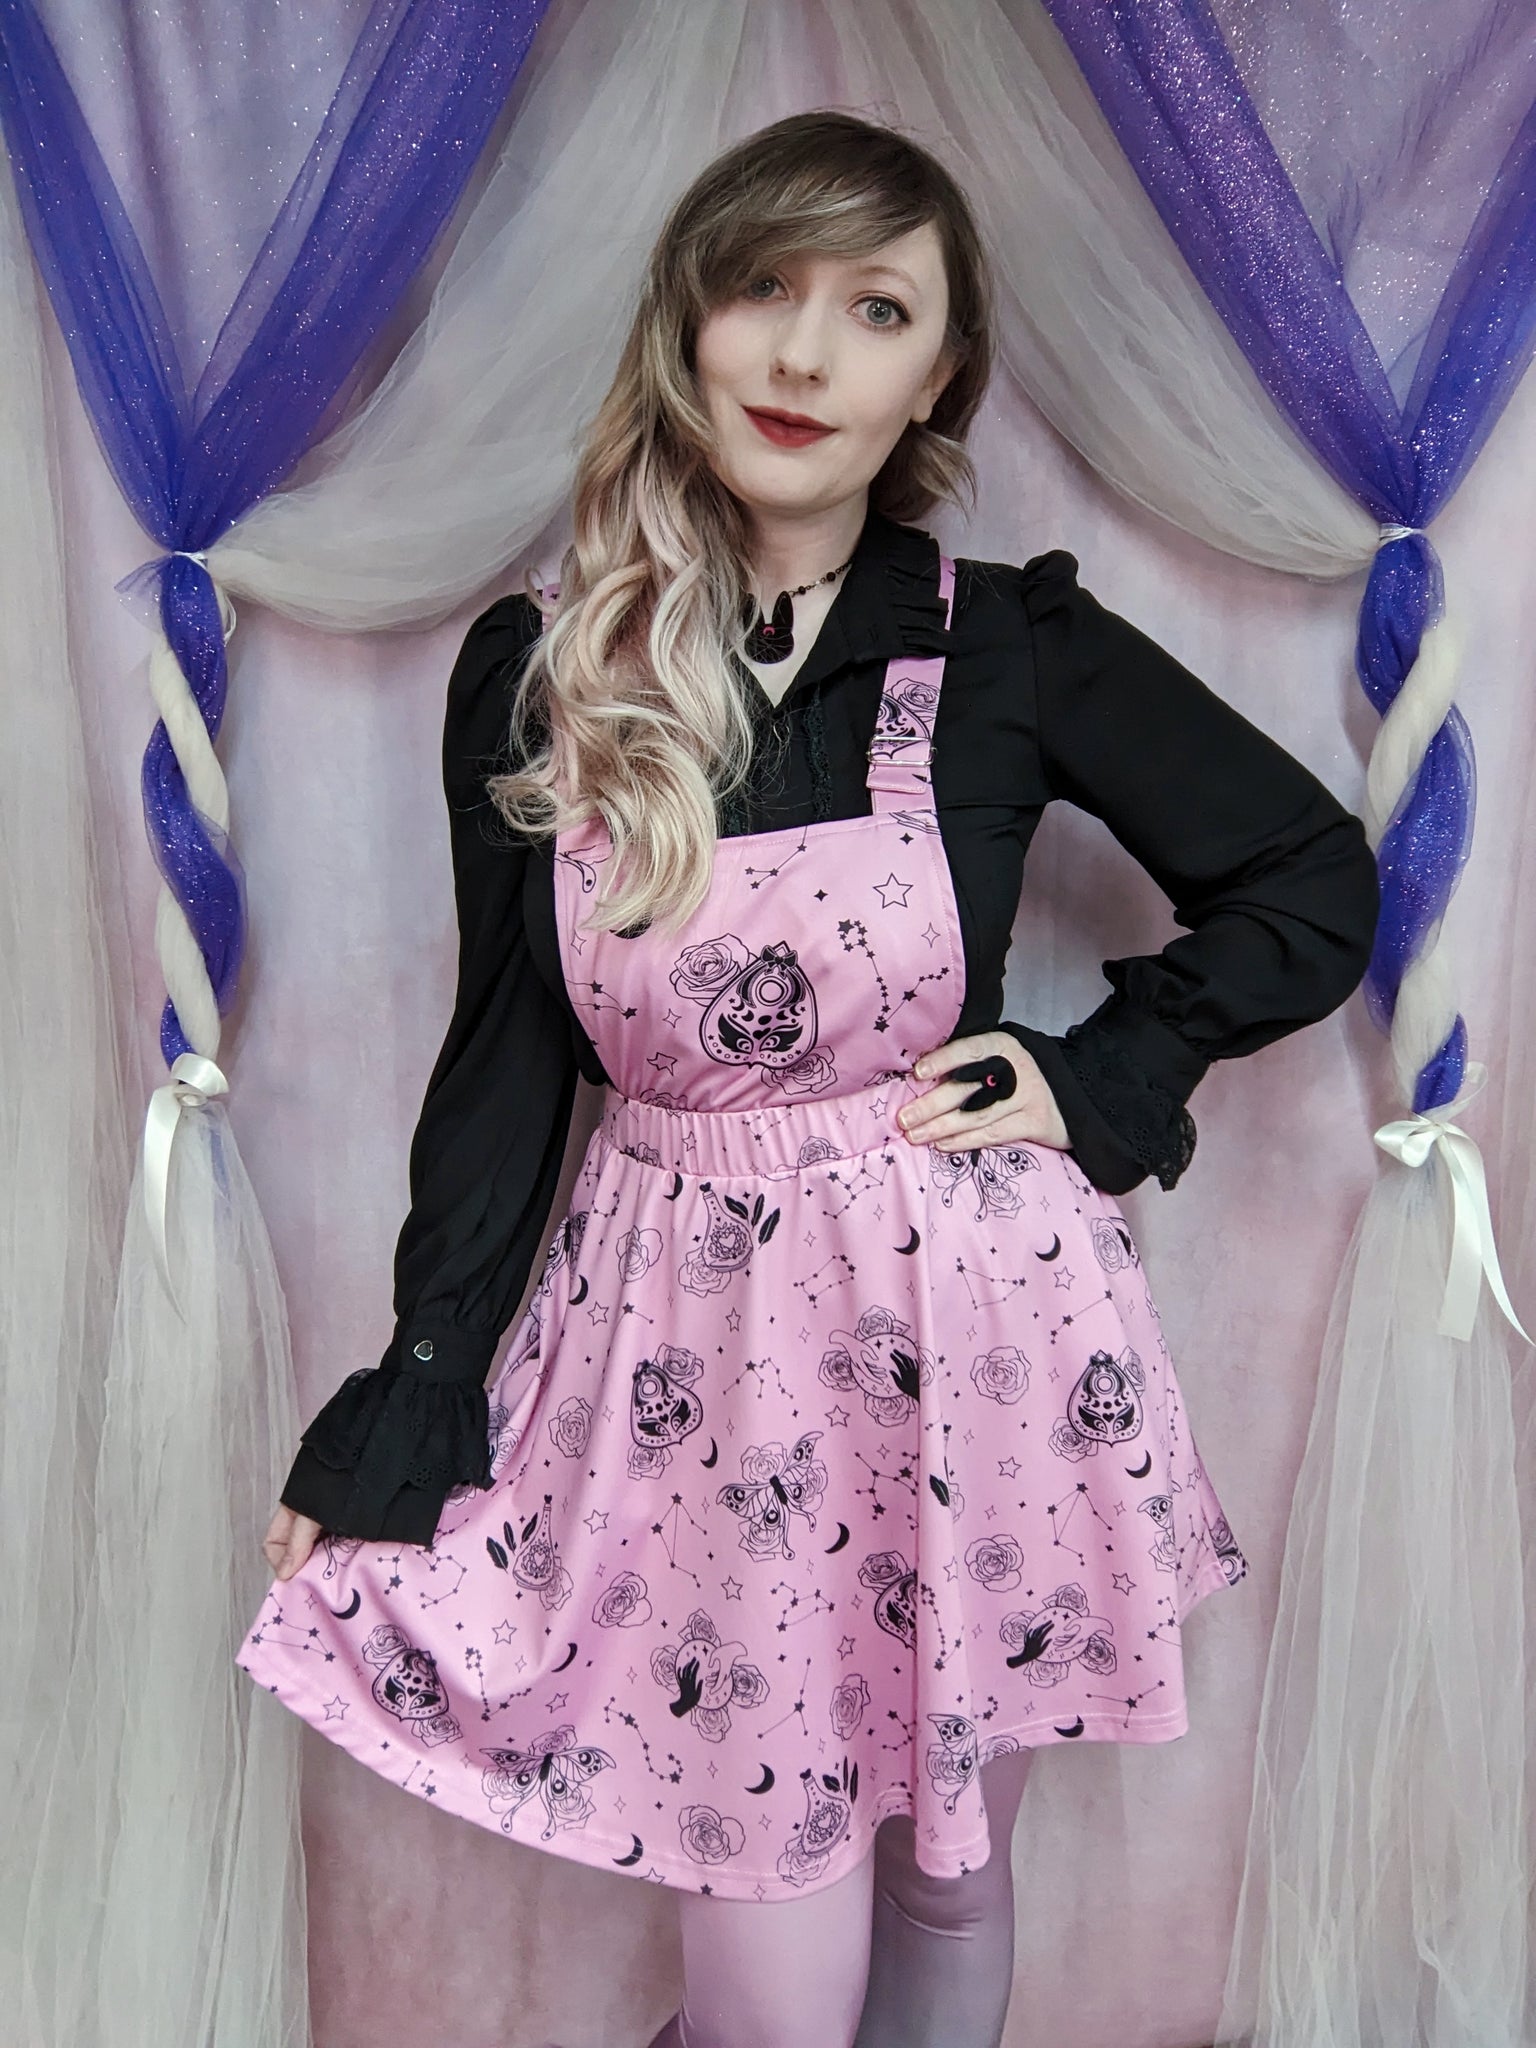 Lovely Oracle Pink Apron Dress